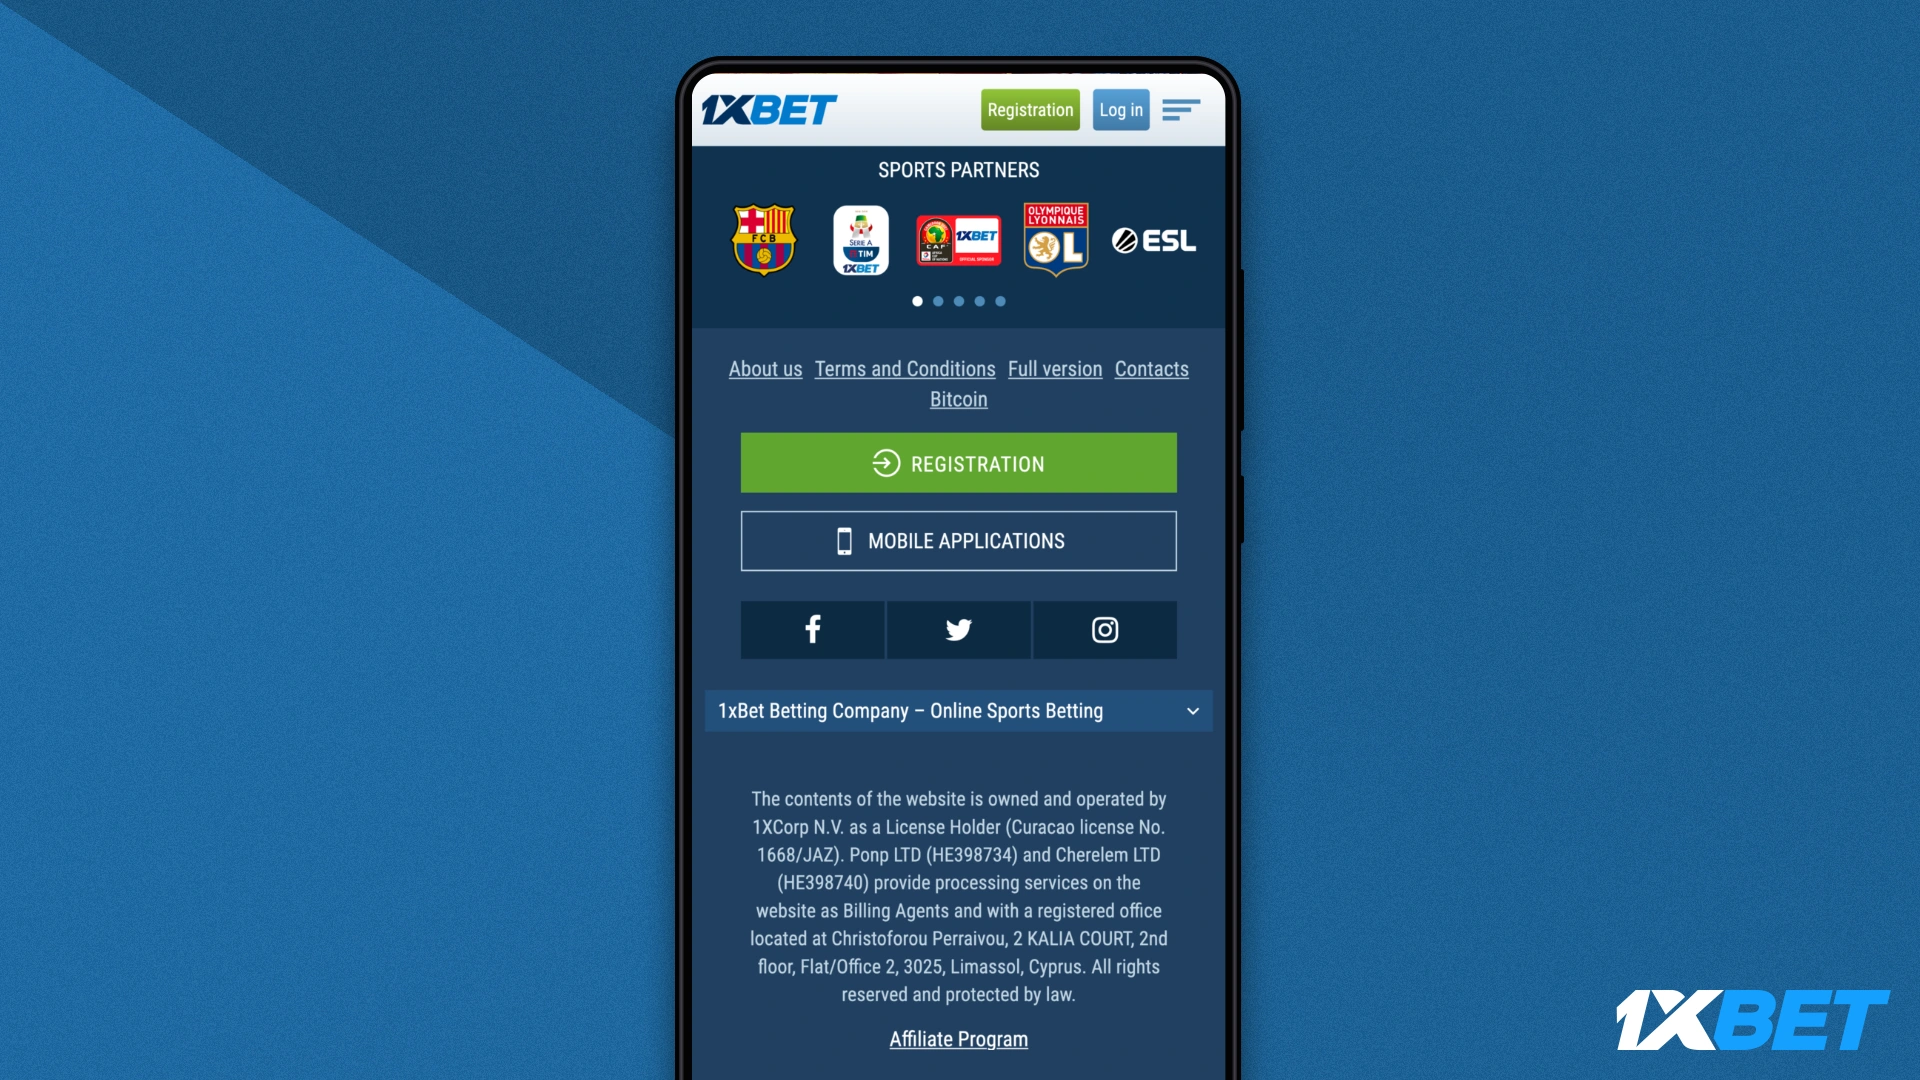 Go to 1xbet's mobile app page